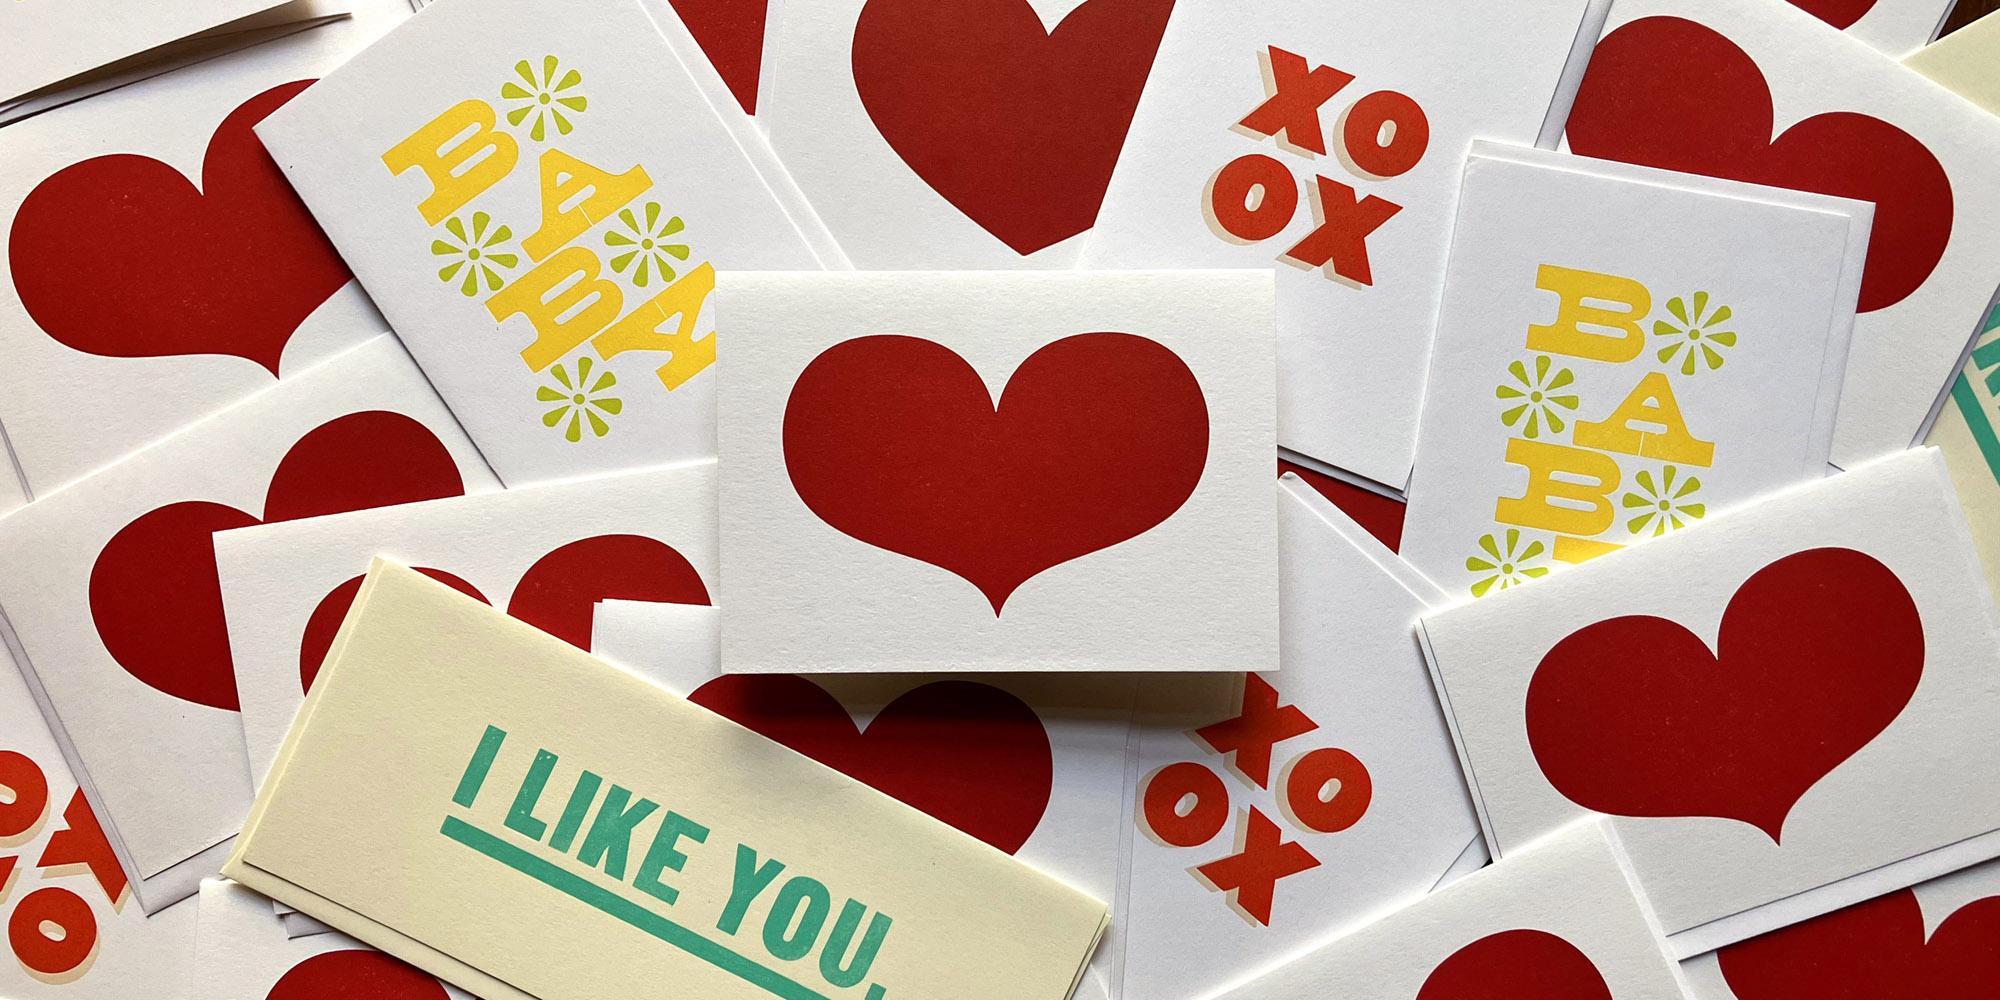 Print Your Own Valentine’s Day Card